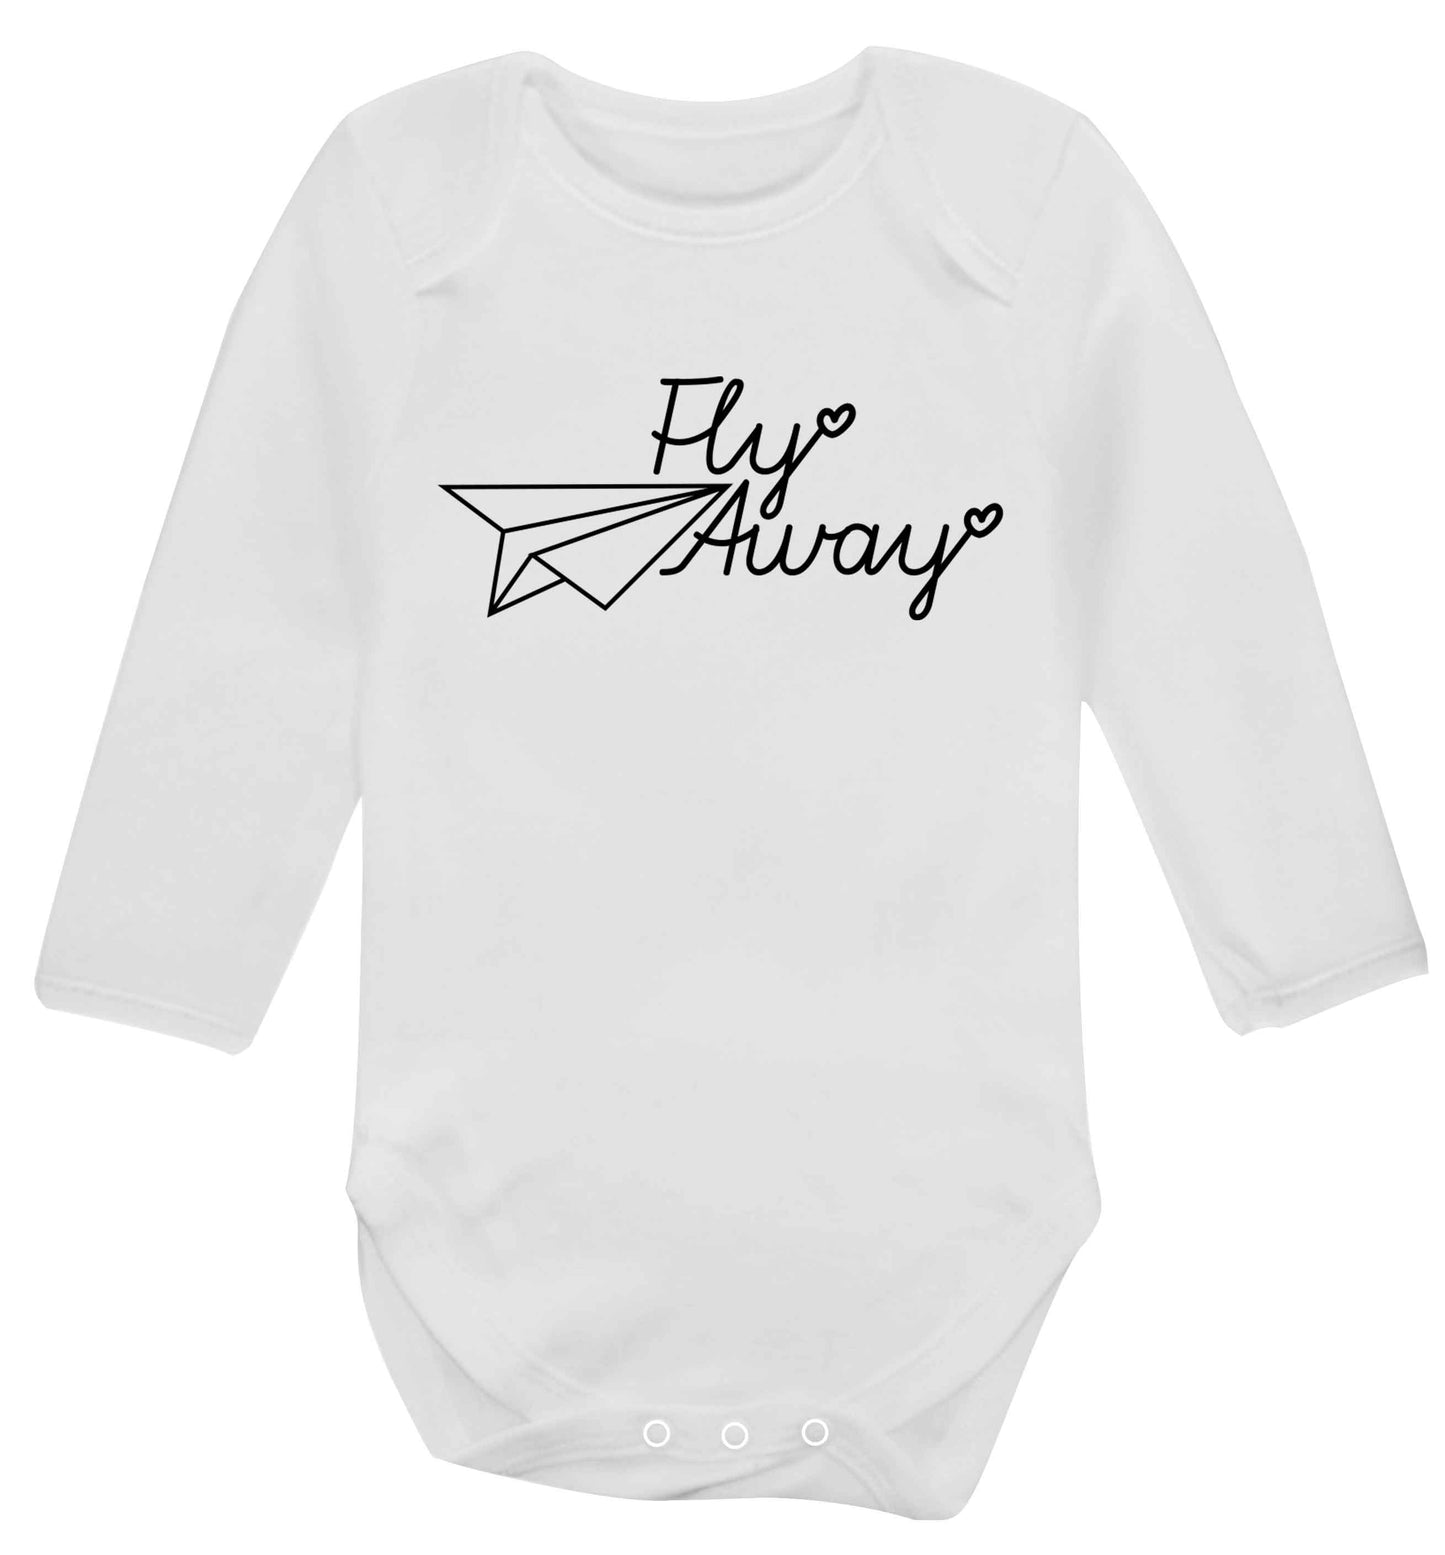 Fly away Baby Vest long sleeved white 6-12 months